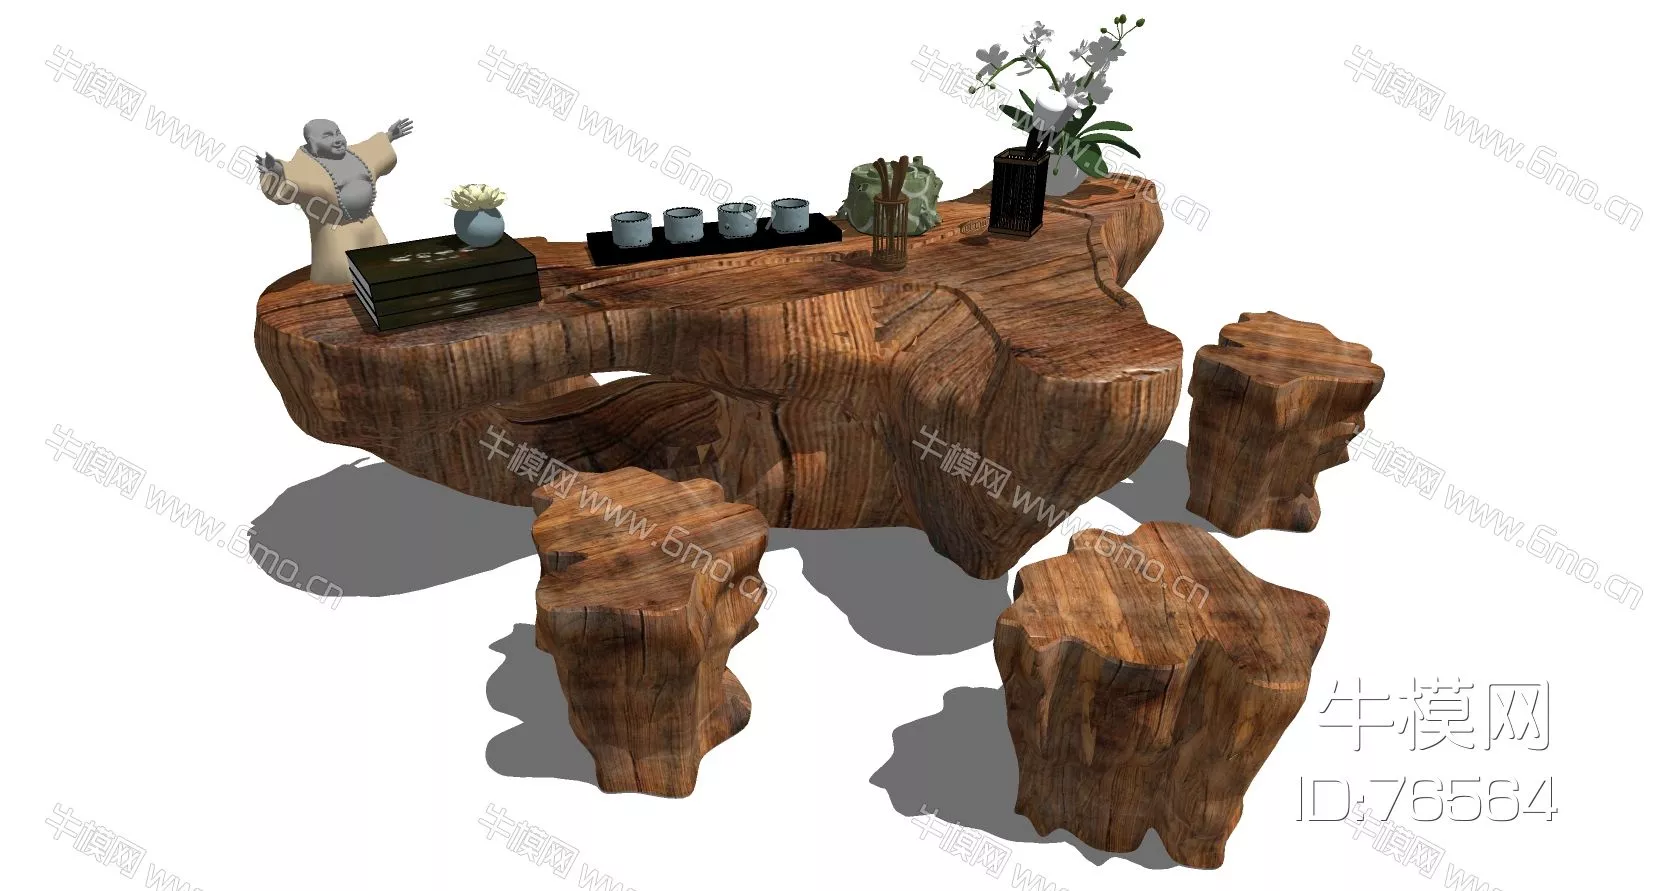 CHINESE COFFEE TABLE - SKETCHUP 3D MODEL - ENSCAPE - 76564